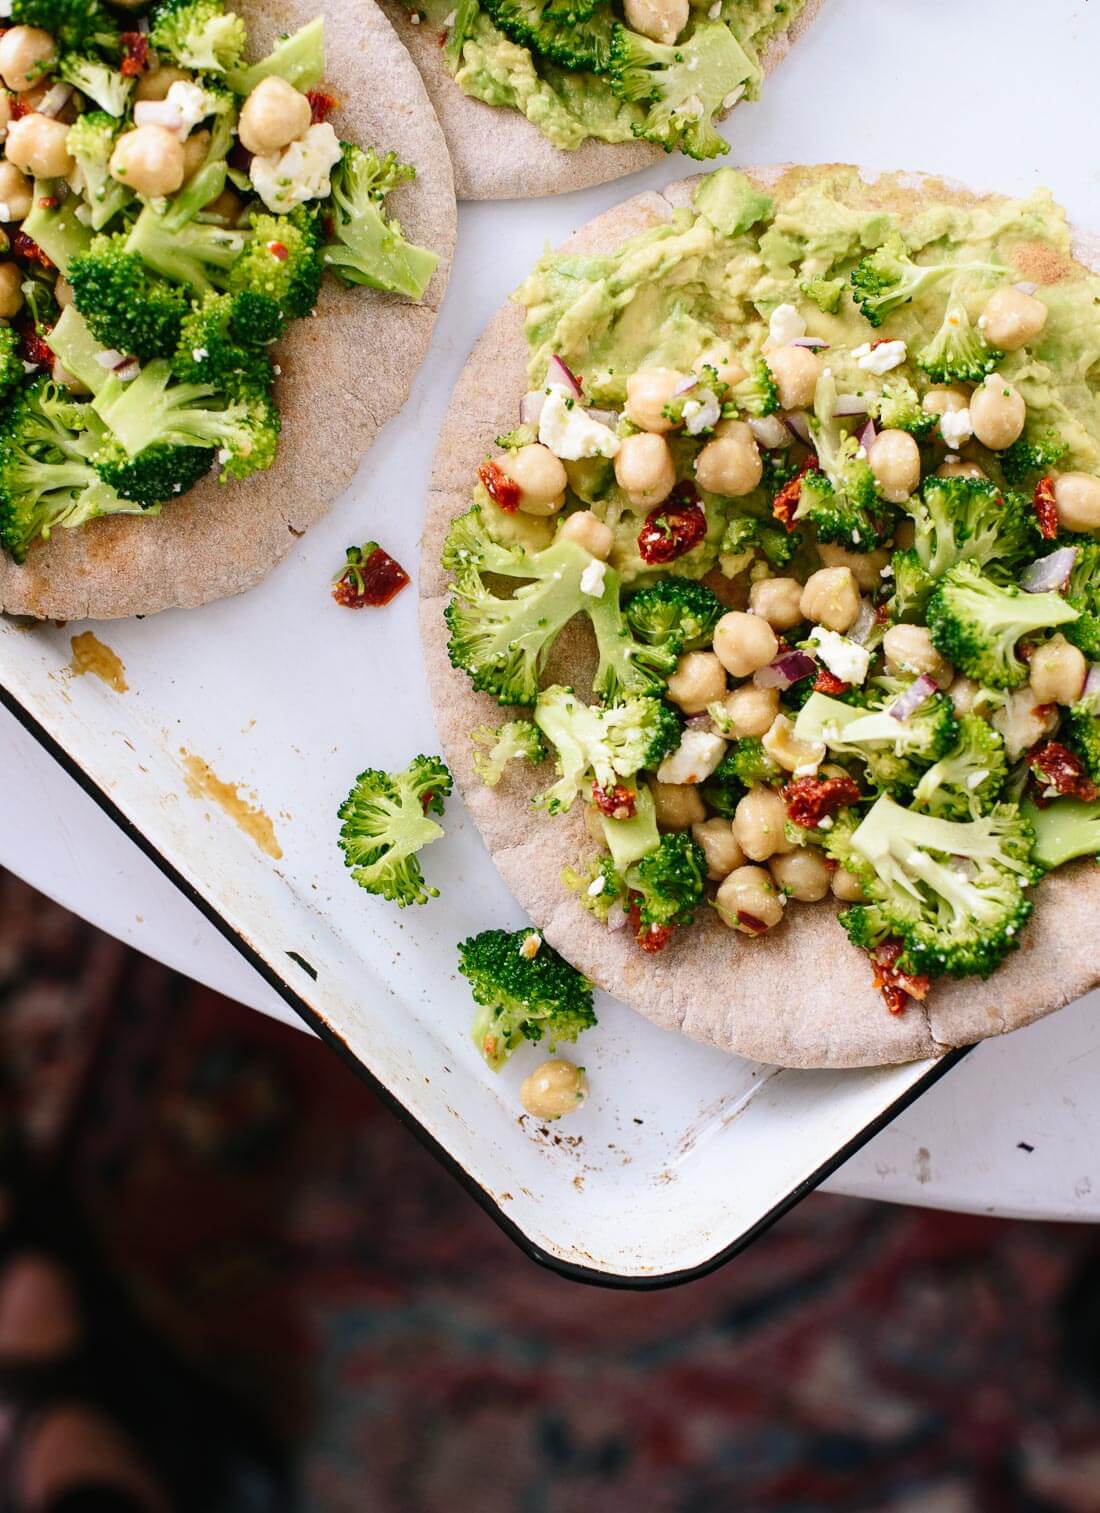 Simple broccoli chickpea pita sandwiches with mashed avocado - cookieandkate.com